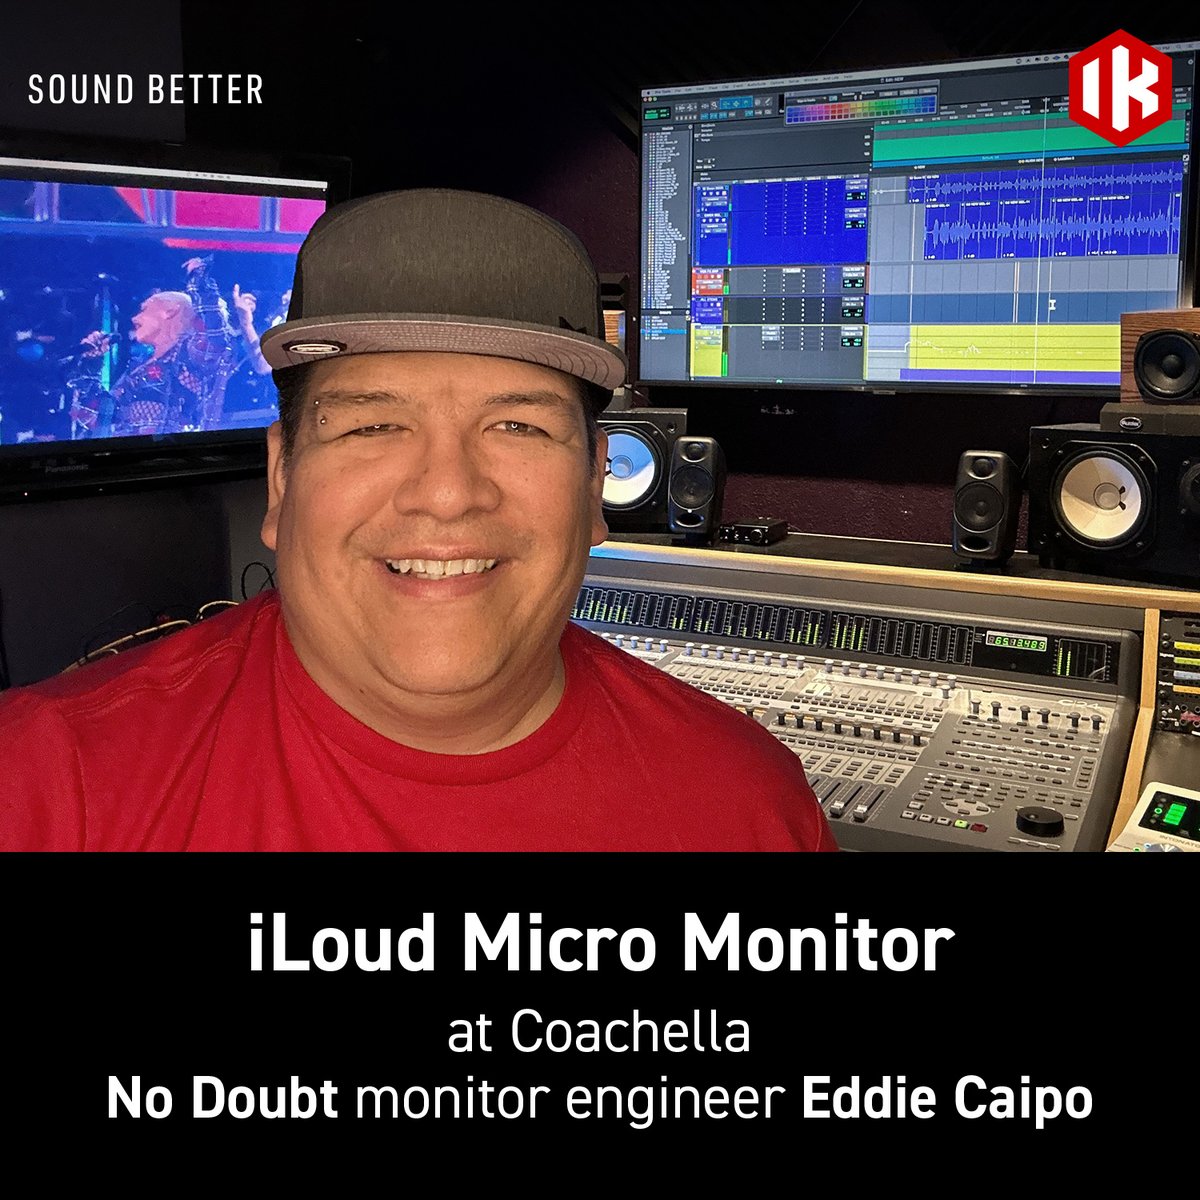 Monitoring engineer Eddie 'El Brujo' Caipo trusts iLoud Micro Monitor for even the most epic performances! Check out his experience at this year's @Coachella with @NoDoubt. bit.ly/elbrujocoachel…